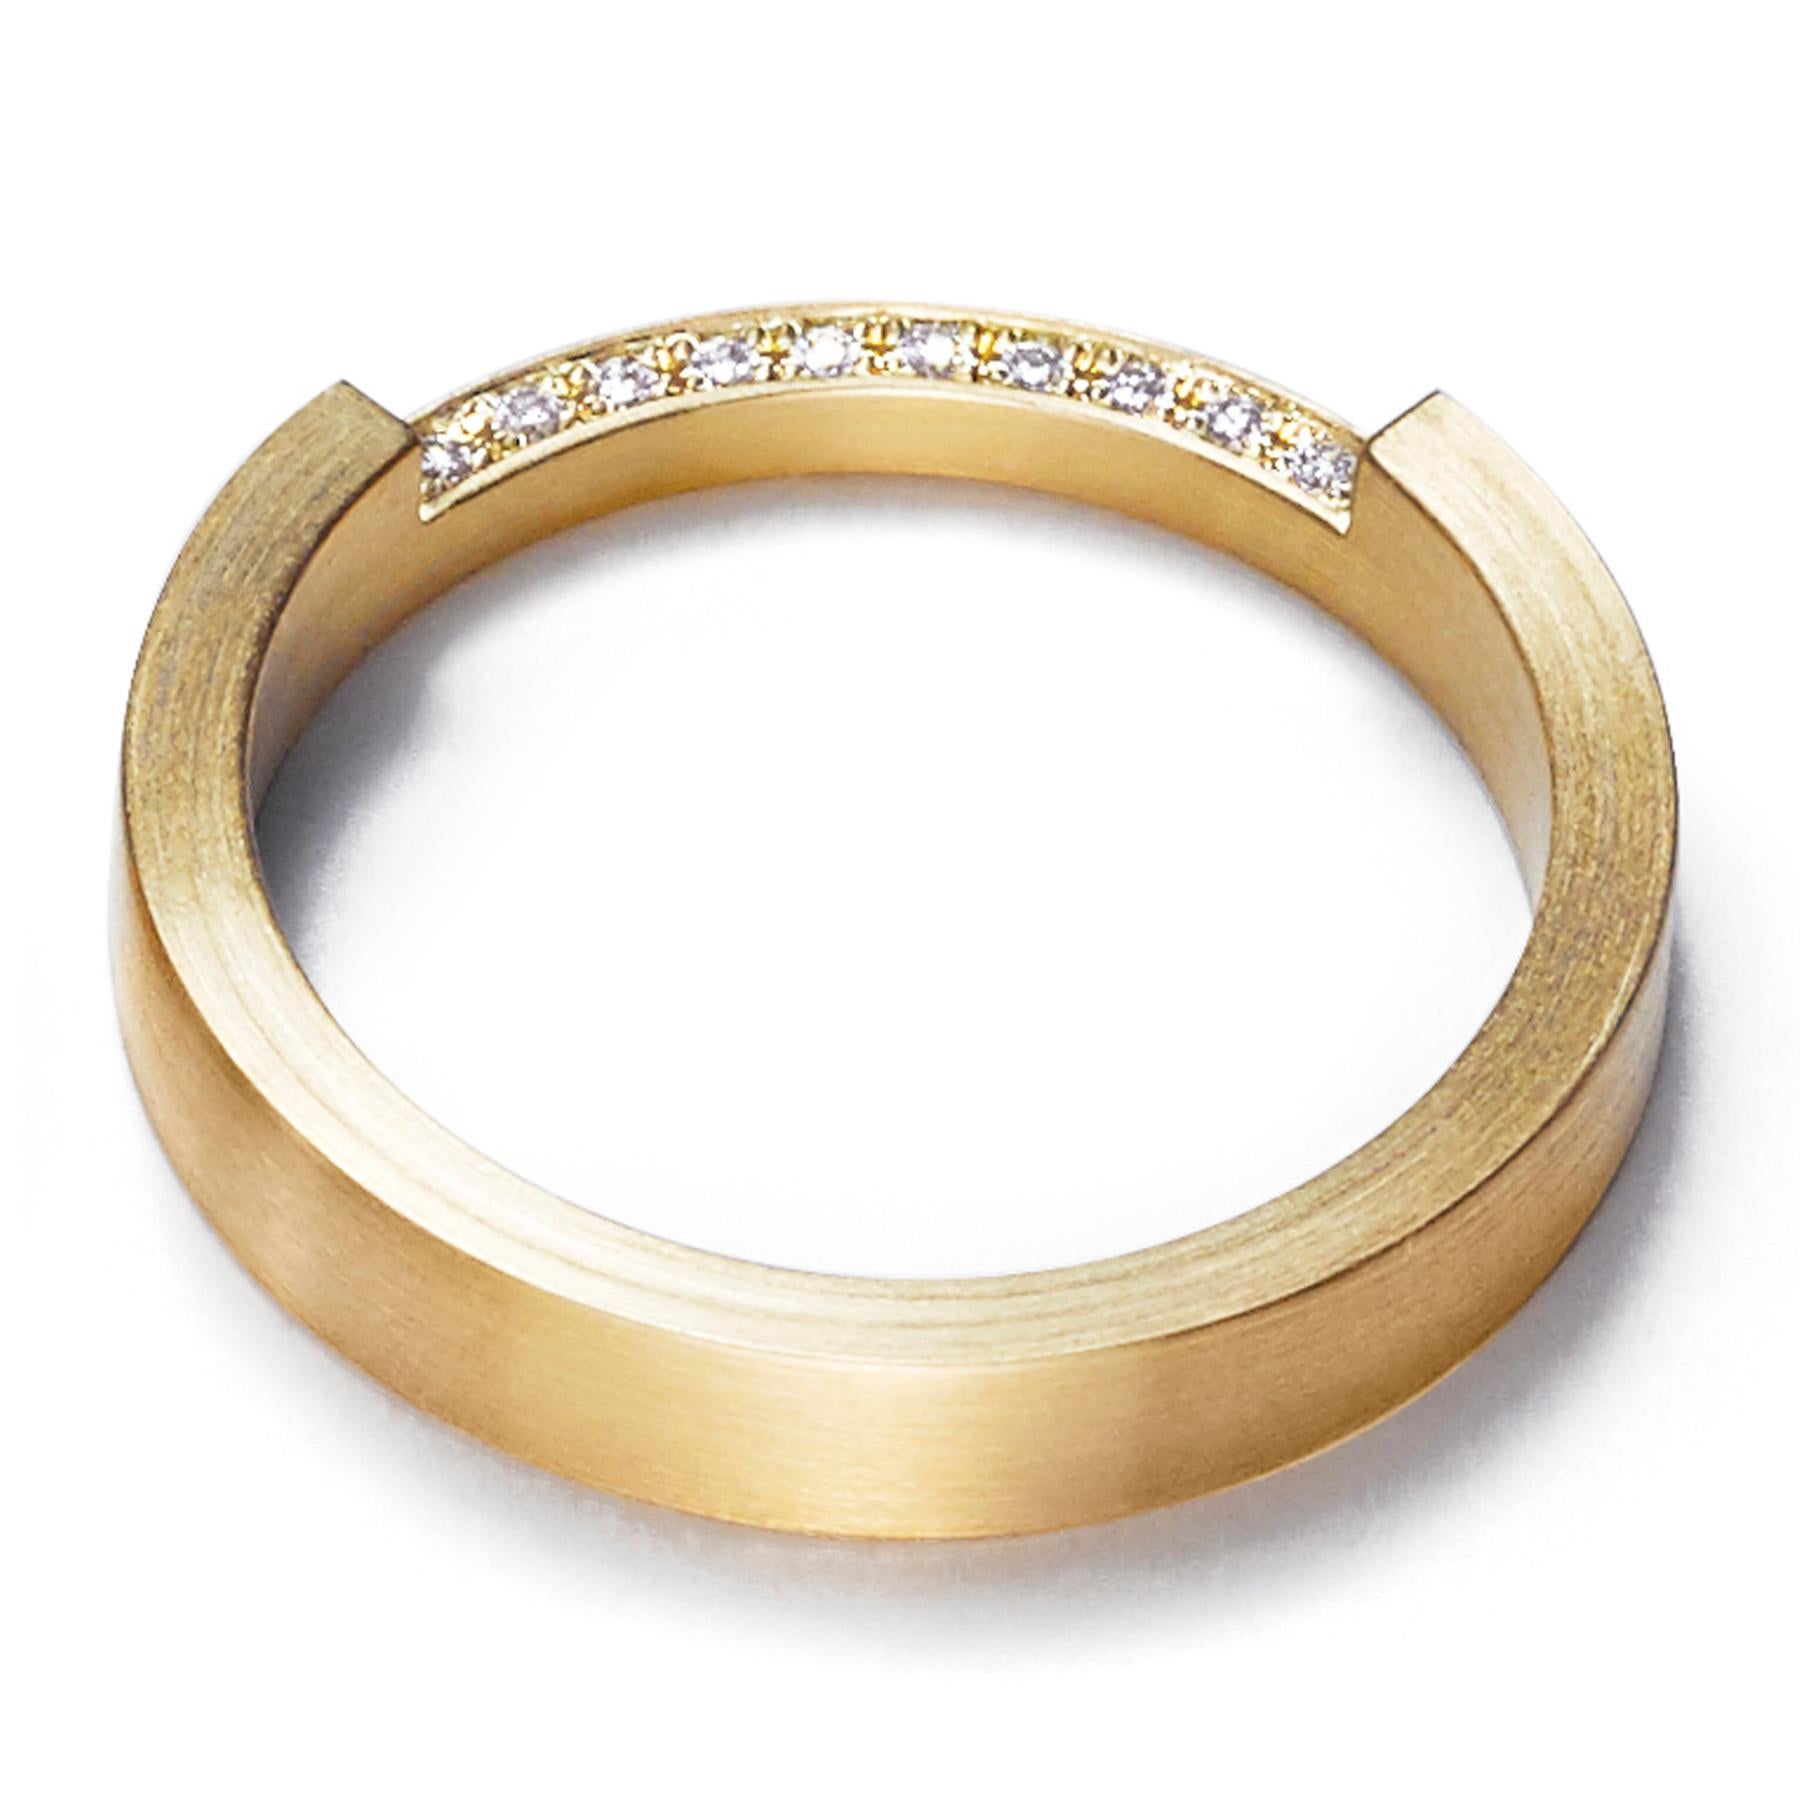 The 'Assemble 01' ring has a square edge band with a quarter of the band narrowed in half and filled with diamonds. Ideal for stacking* with other rings from the 'Assemble' range.

Diamond: 1mm (amount varies depending on ring size)
Band width: